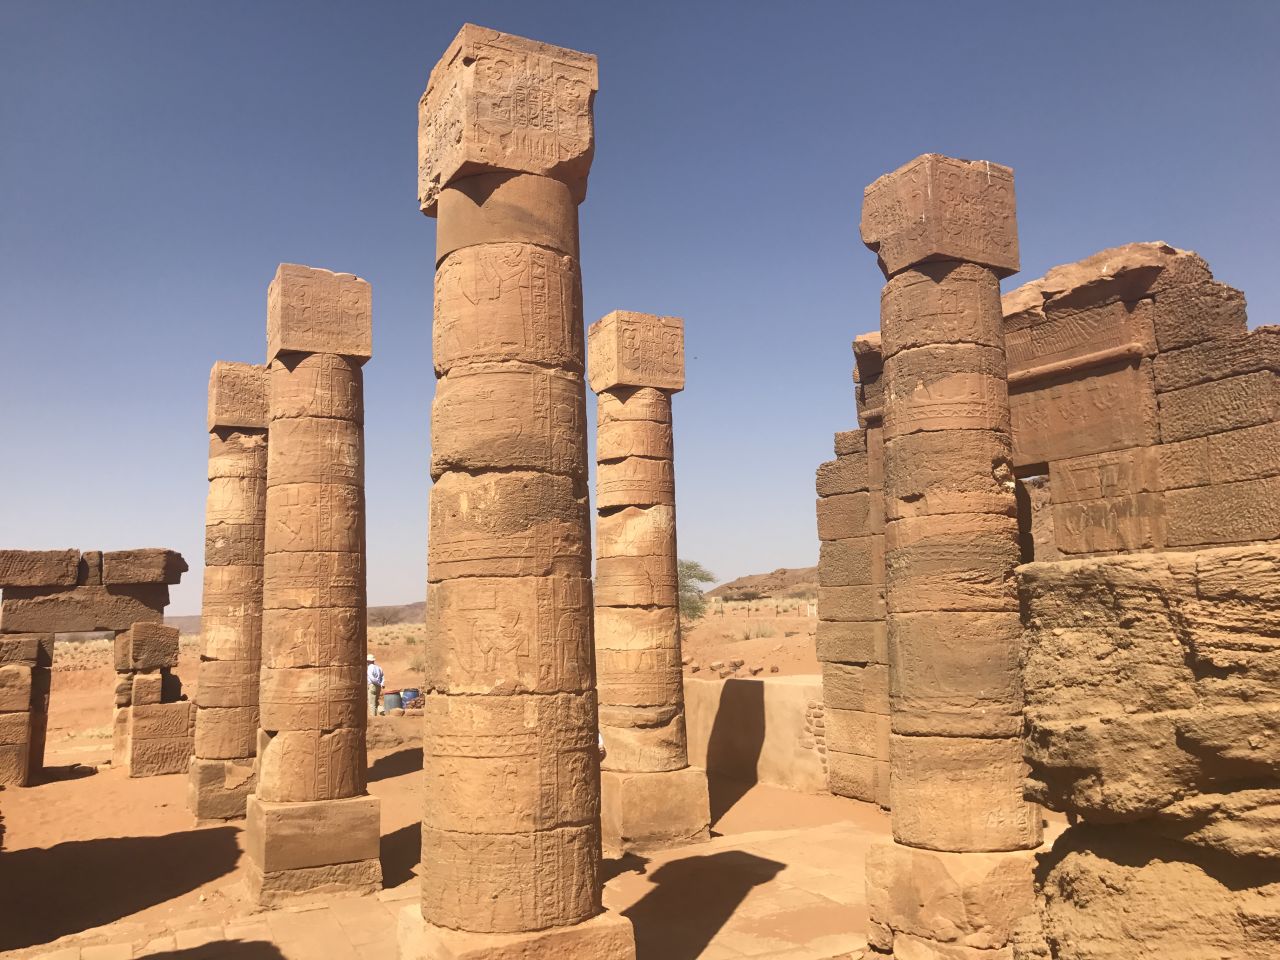 According to UNESCO, the wide range of architectural forms found at the Island of Meroe -- a semi-desert landscape between the Nile and Atbara rivers -- is proof of contact between Sub-Saharan Africa and the Mediterranean and Middle Eastern worlds in this period. 